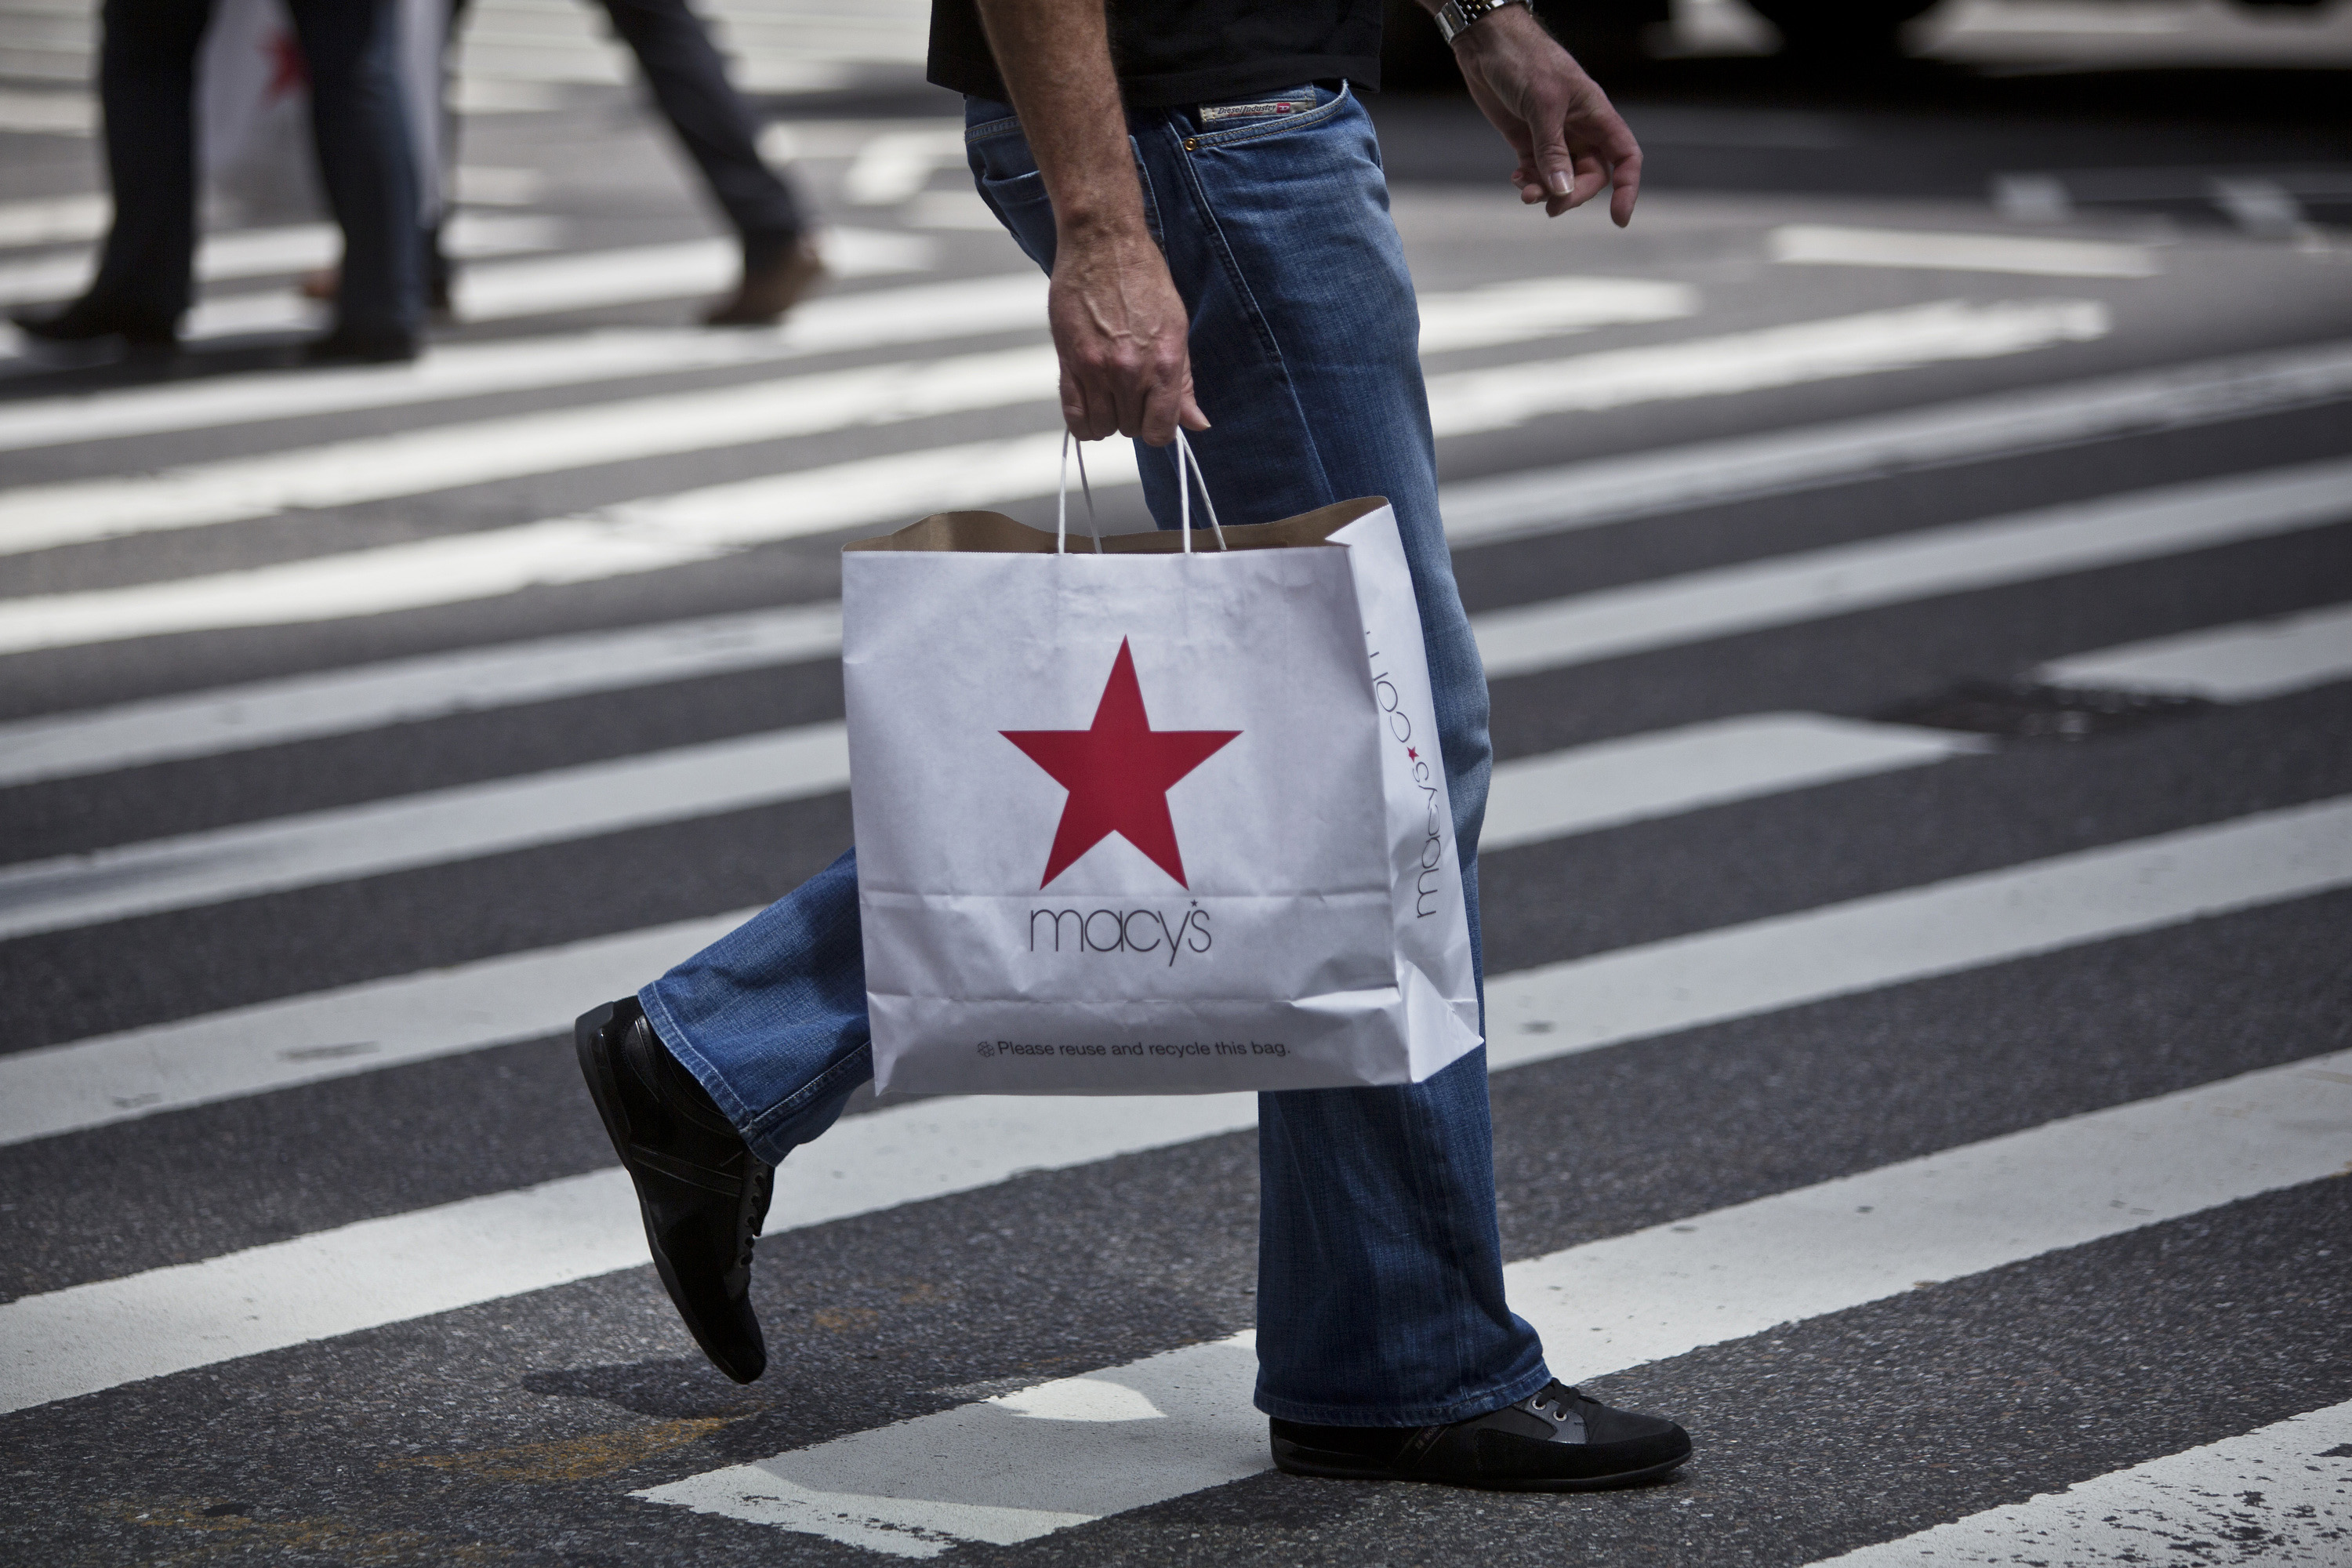 Profit at Macy’s, the second-largest U.S. department-store chain, will jump 14 percent to a record this year, estimates compiled by Bloomberg show.